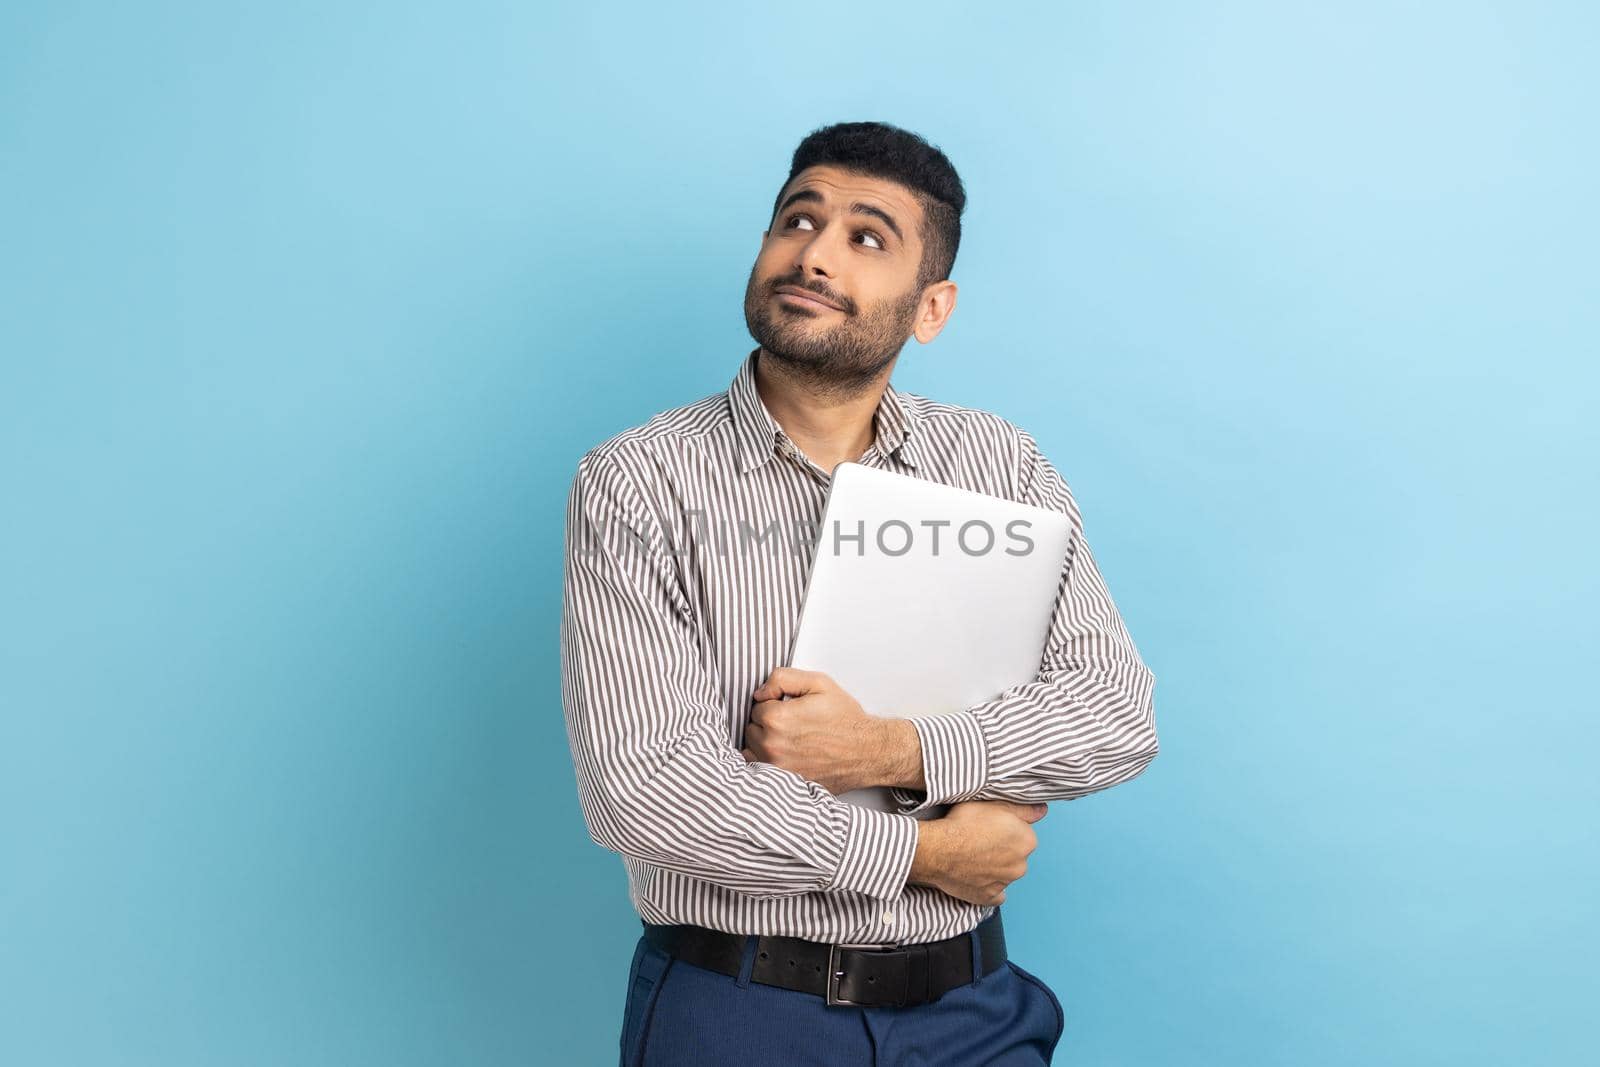 Portrait of pensive businessman standing holding closed laptop or folder, looking away with thoughtful expression, wearing striped shirt. Indoor studio shot isolated on blue background.